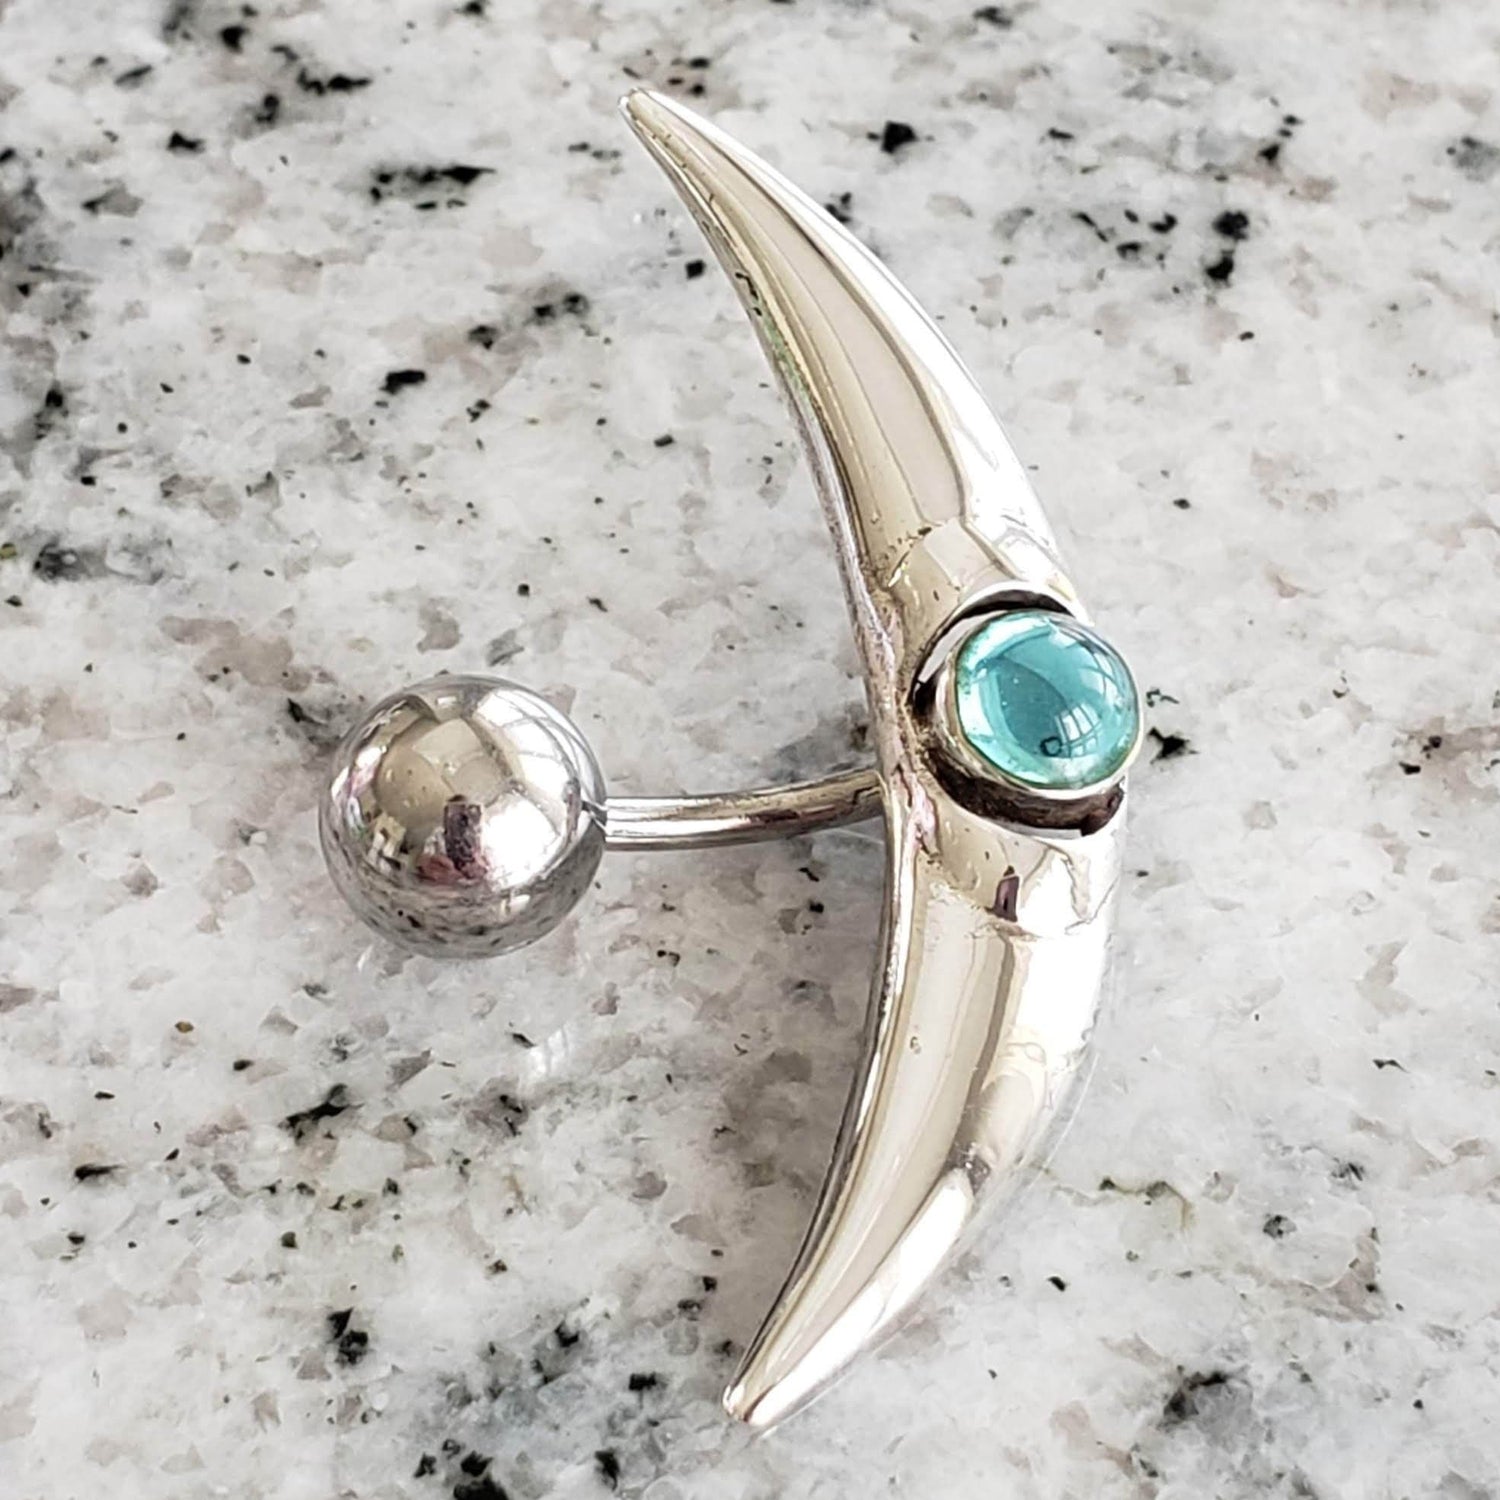 Crescent Shape Reverse Belly Ring | Surgical Steel and 925 Silver | Aquamarine Crystal | Canagem.com